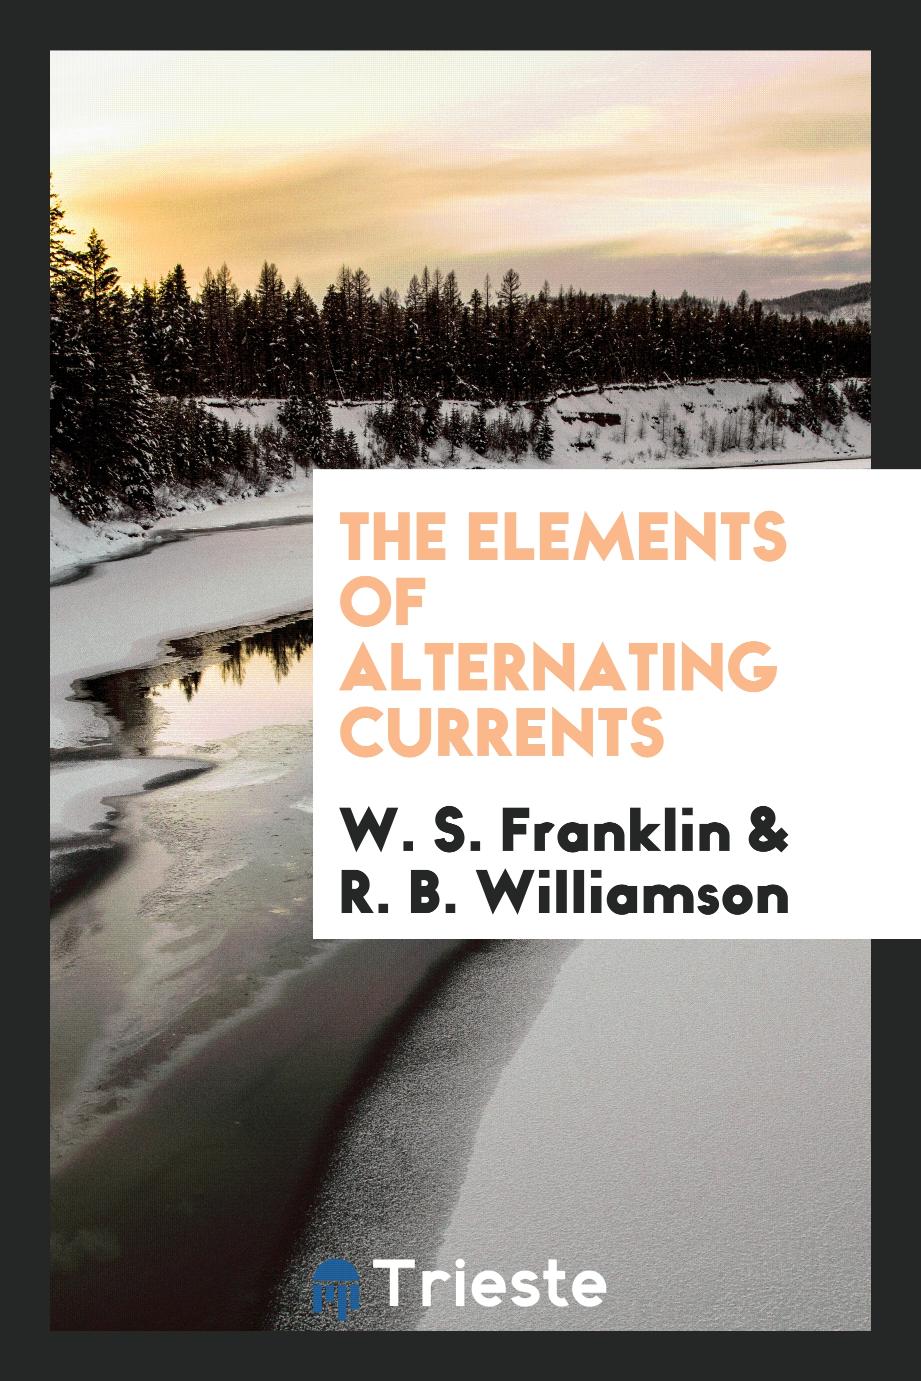 The elements of alternating currents